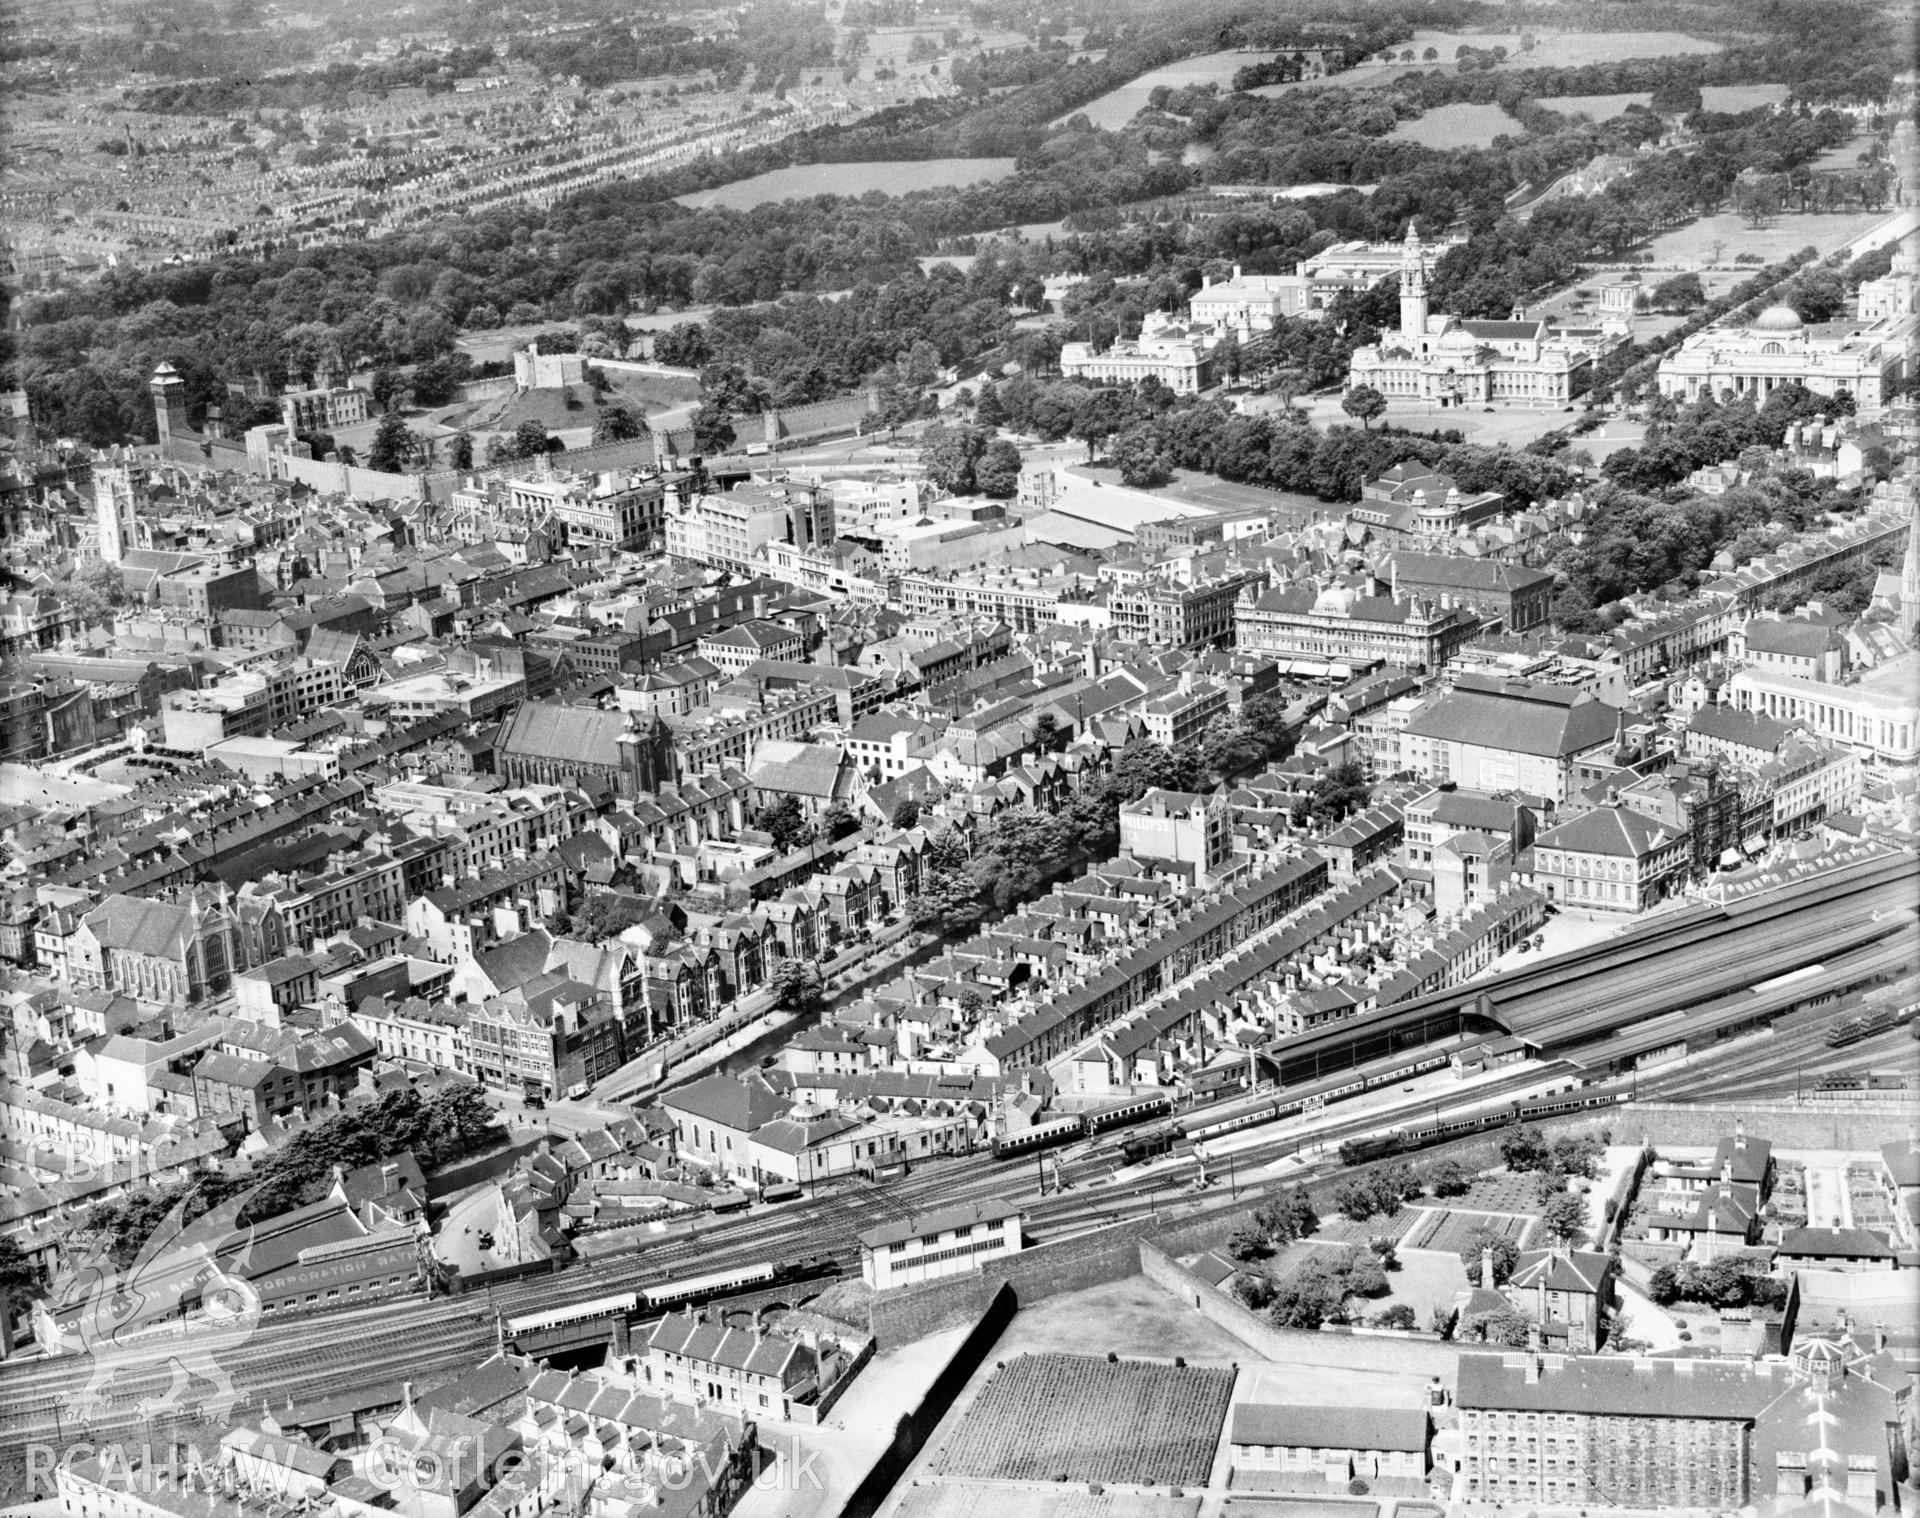 View of central Cardiff showing Cardiff Queen Street station, oblique aerial view. 51/2x41/2" black and white glass plate negative.